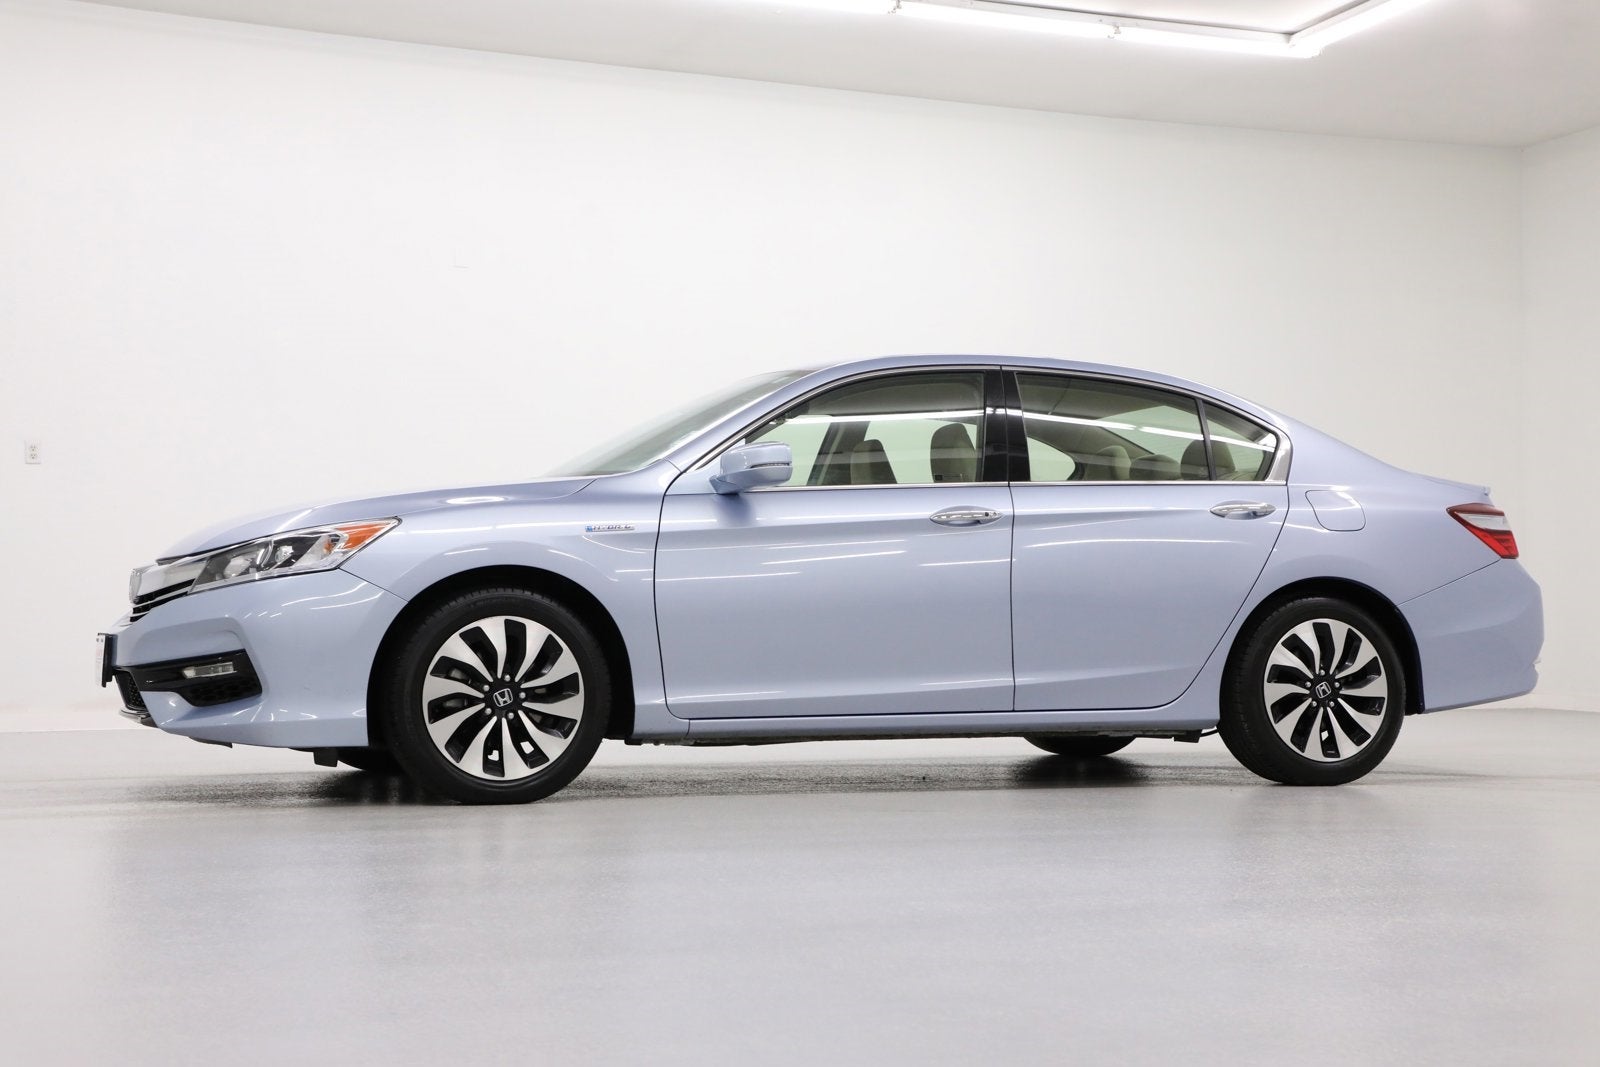 2017 Honda Accord Hybrid HD Backup Camera Cruise Bluetooth Dual Zone AC Low Mileage Clean Carfax Low Payments